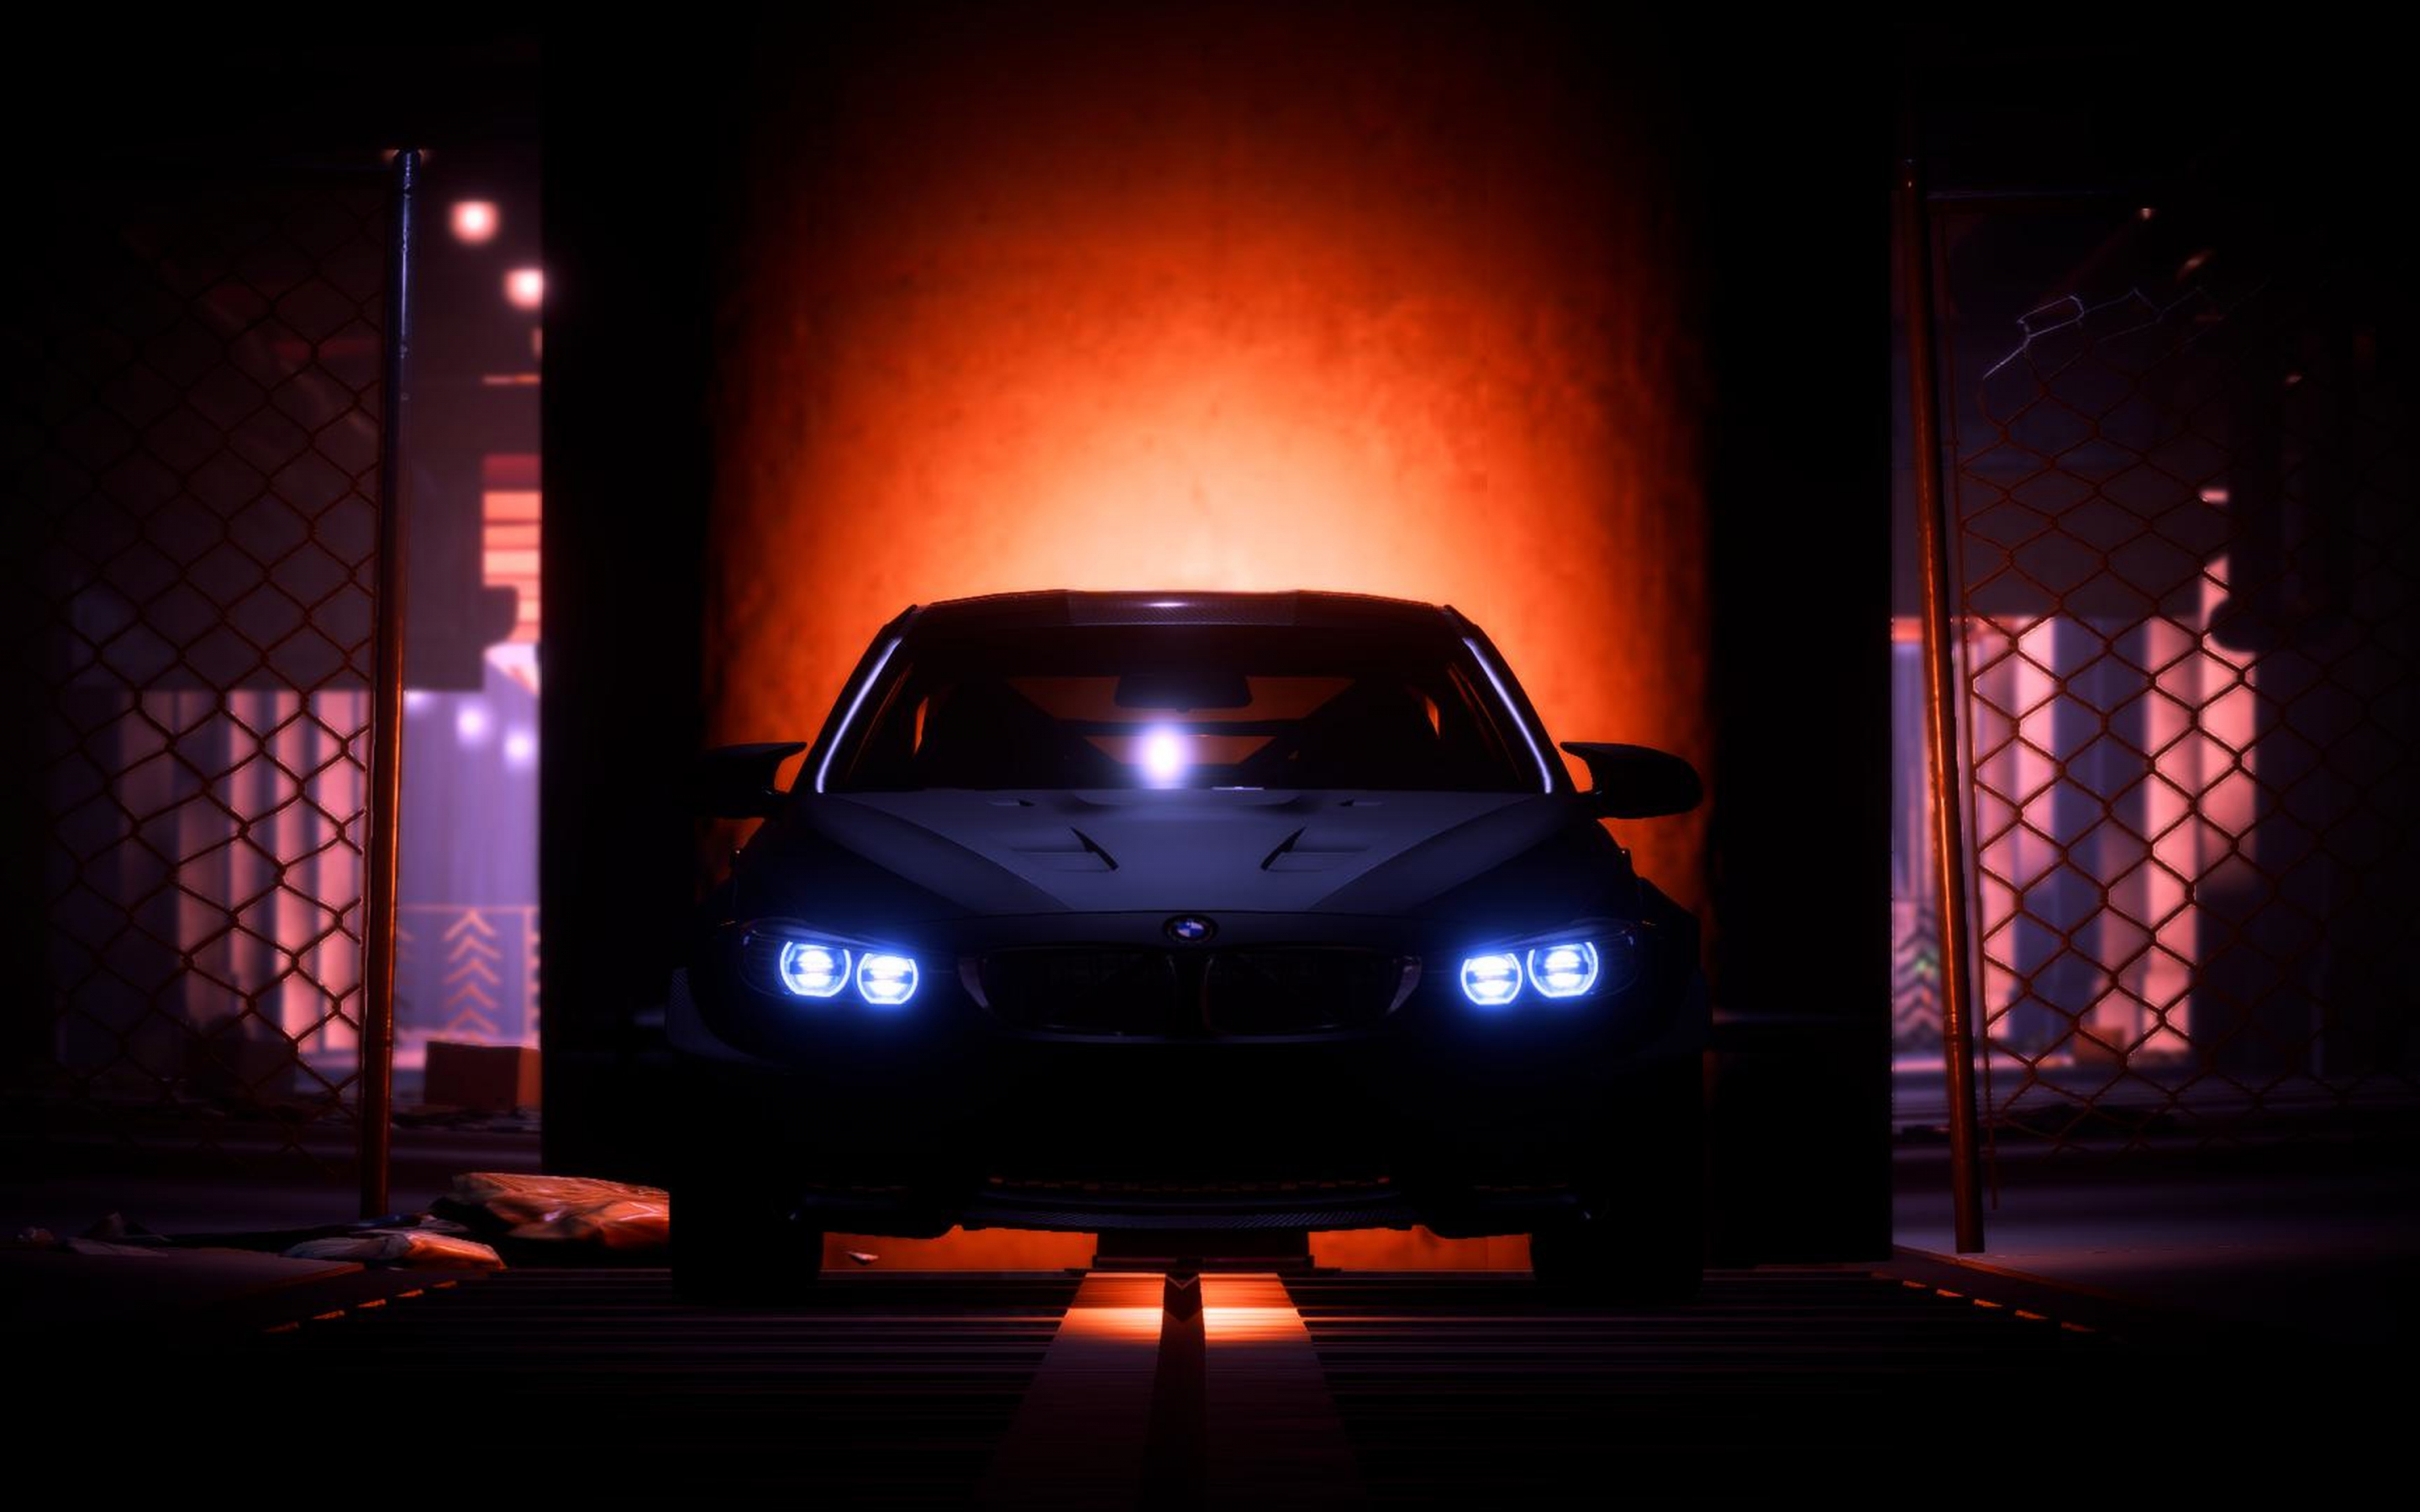 Bmw, headlight, need for speed, video game, 2880x1800 wallpaper